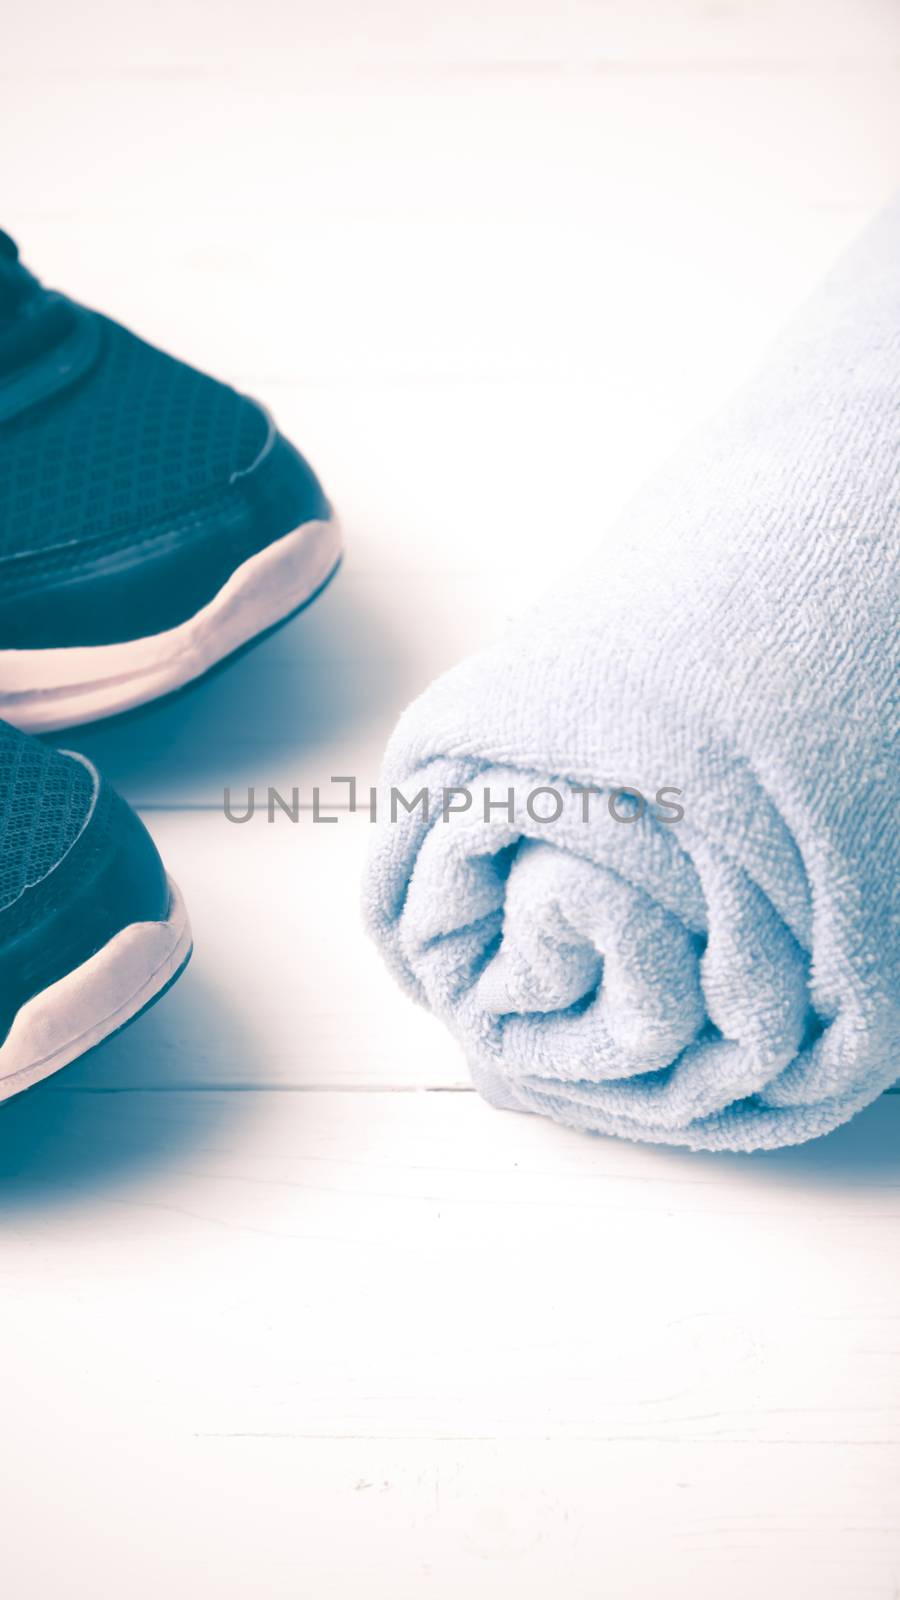 running shoes and towel on white wood table vintage style